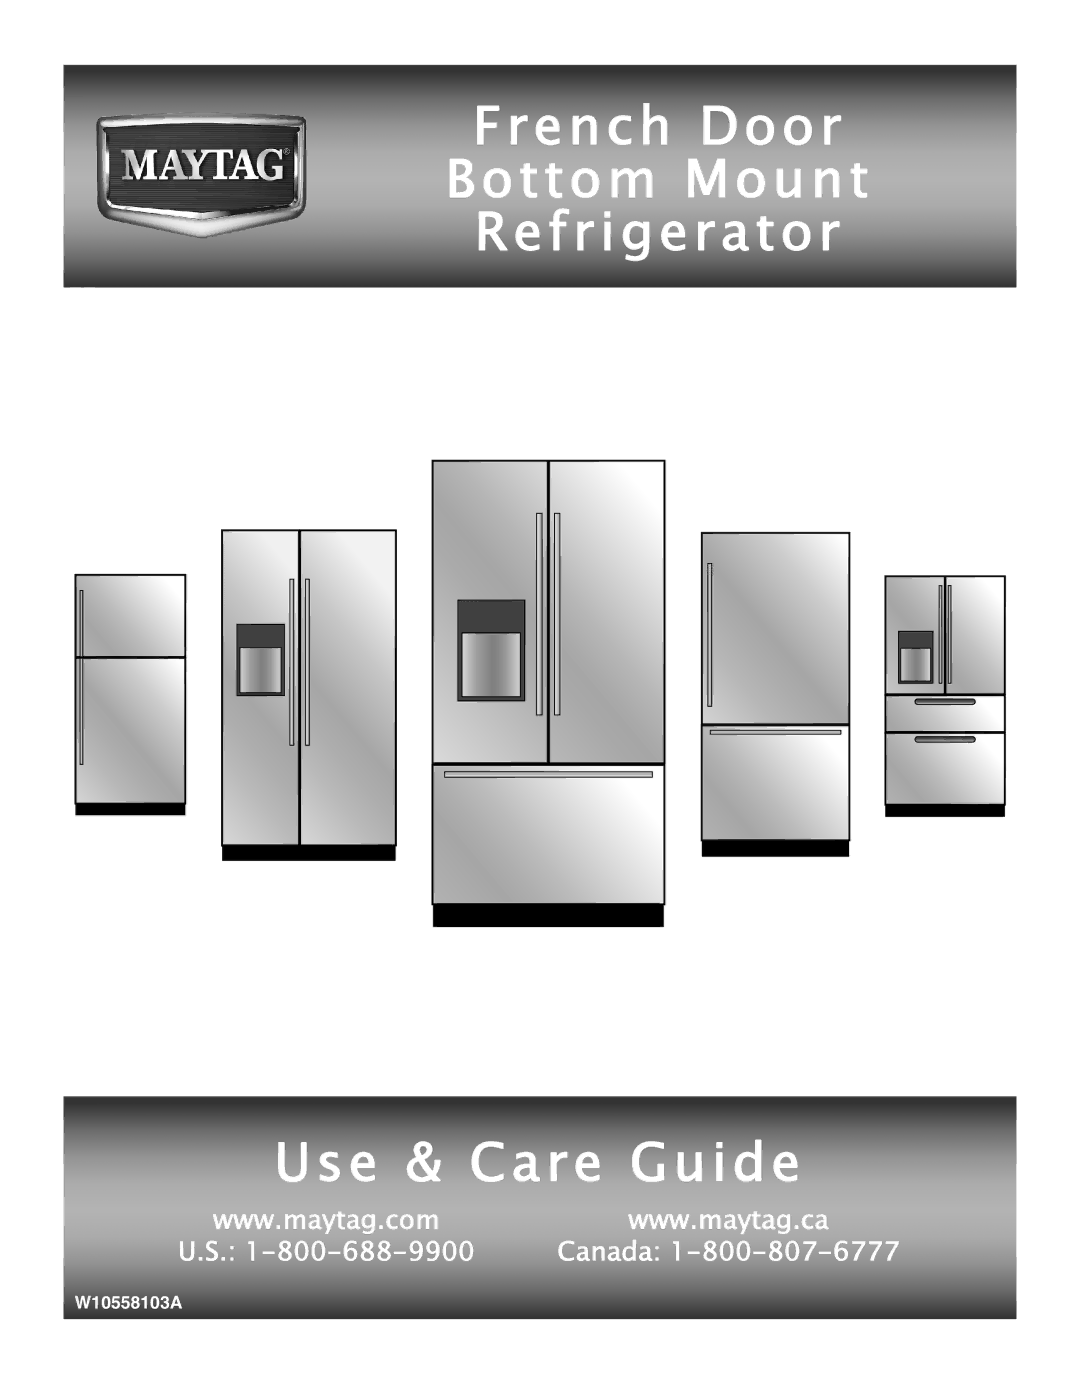 Maytag W10558103A manual French Door Bottom Mount Refrigerator Use & Care Guide 